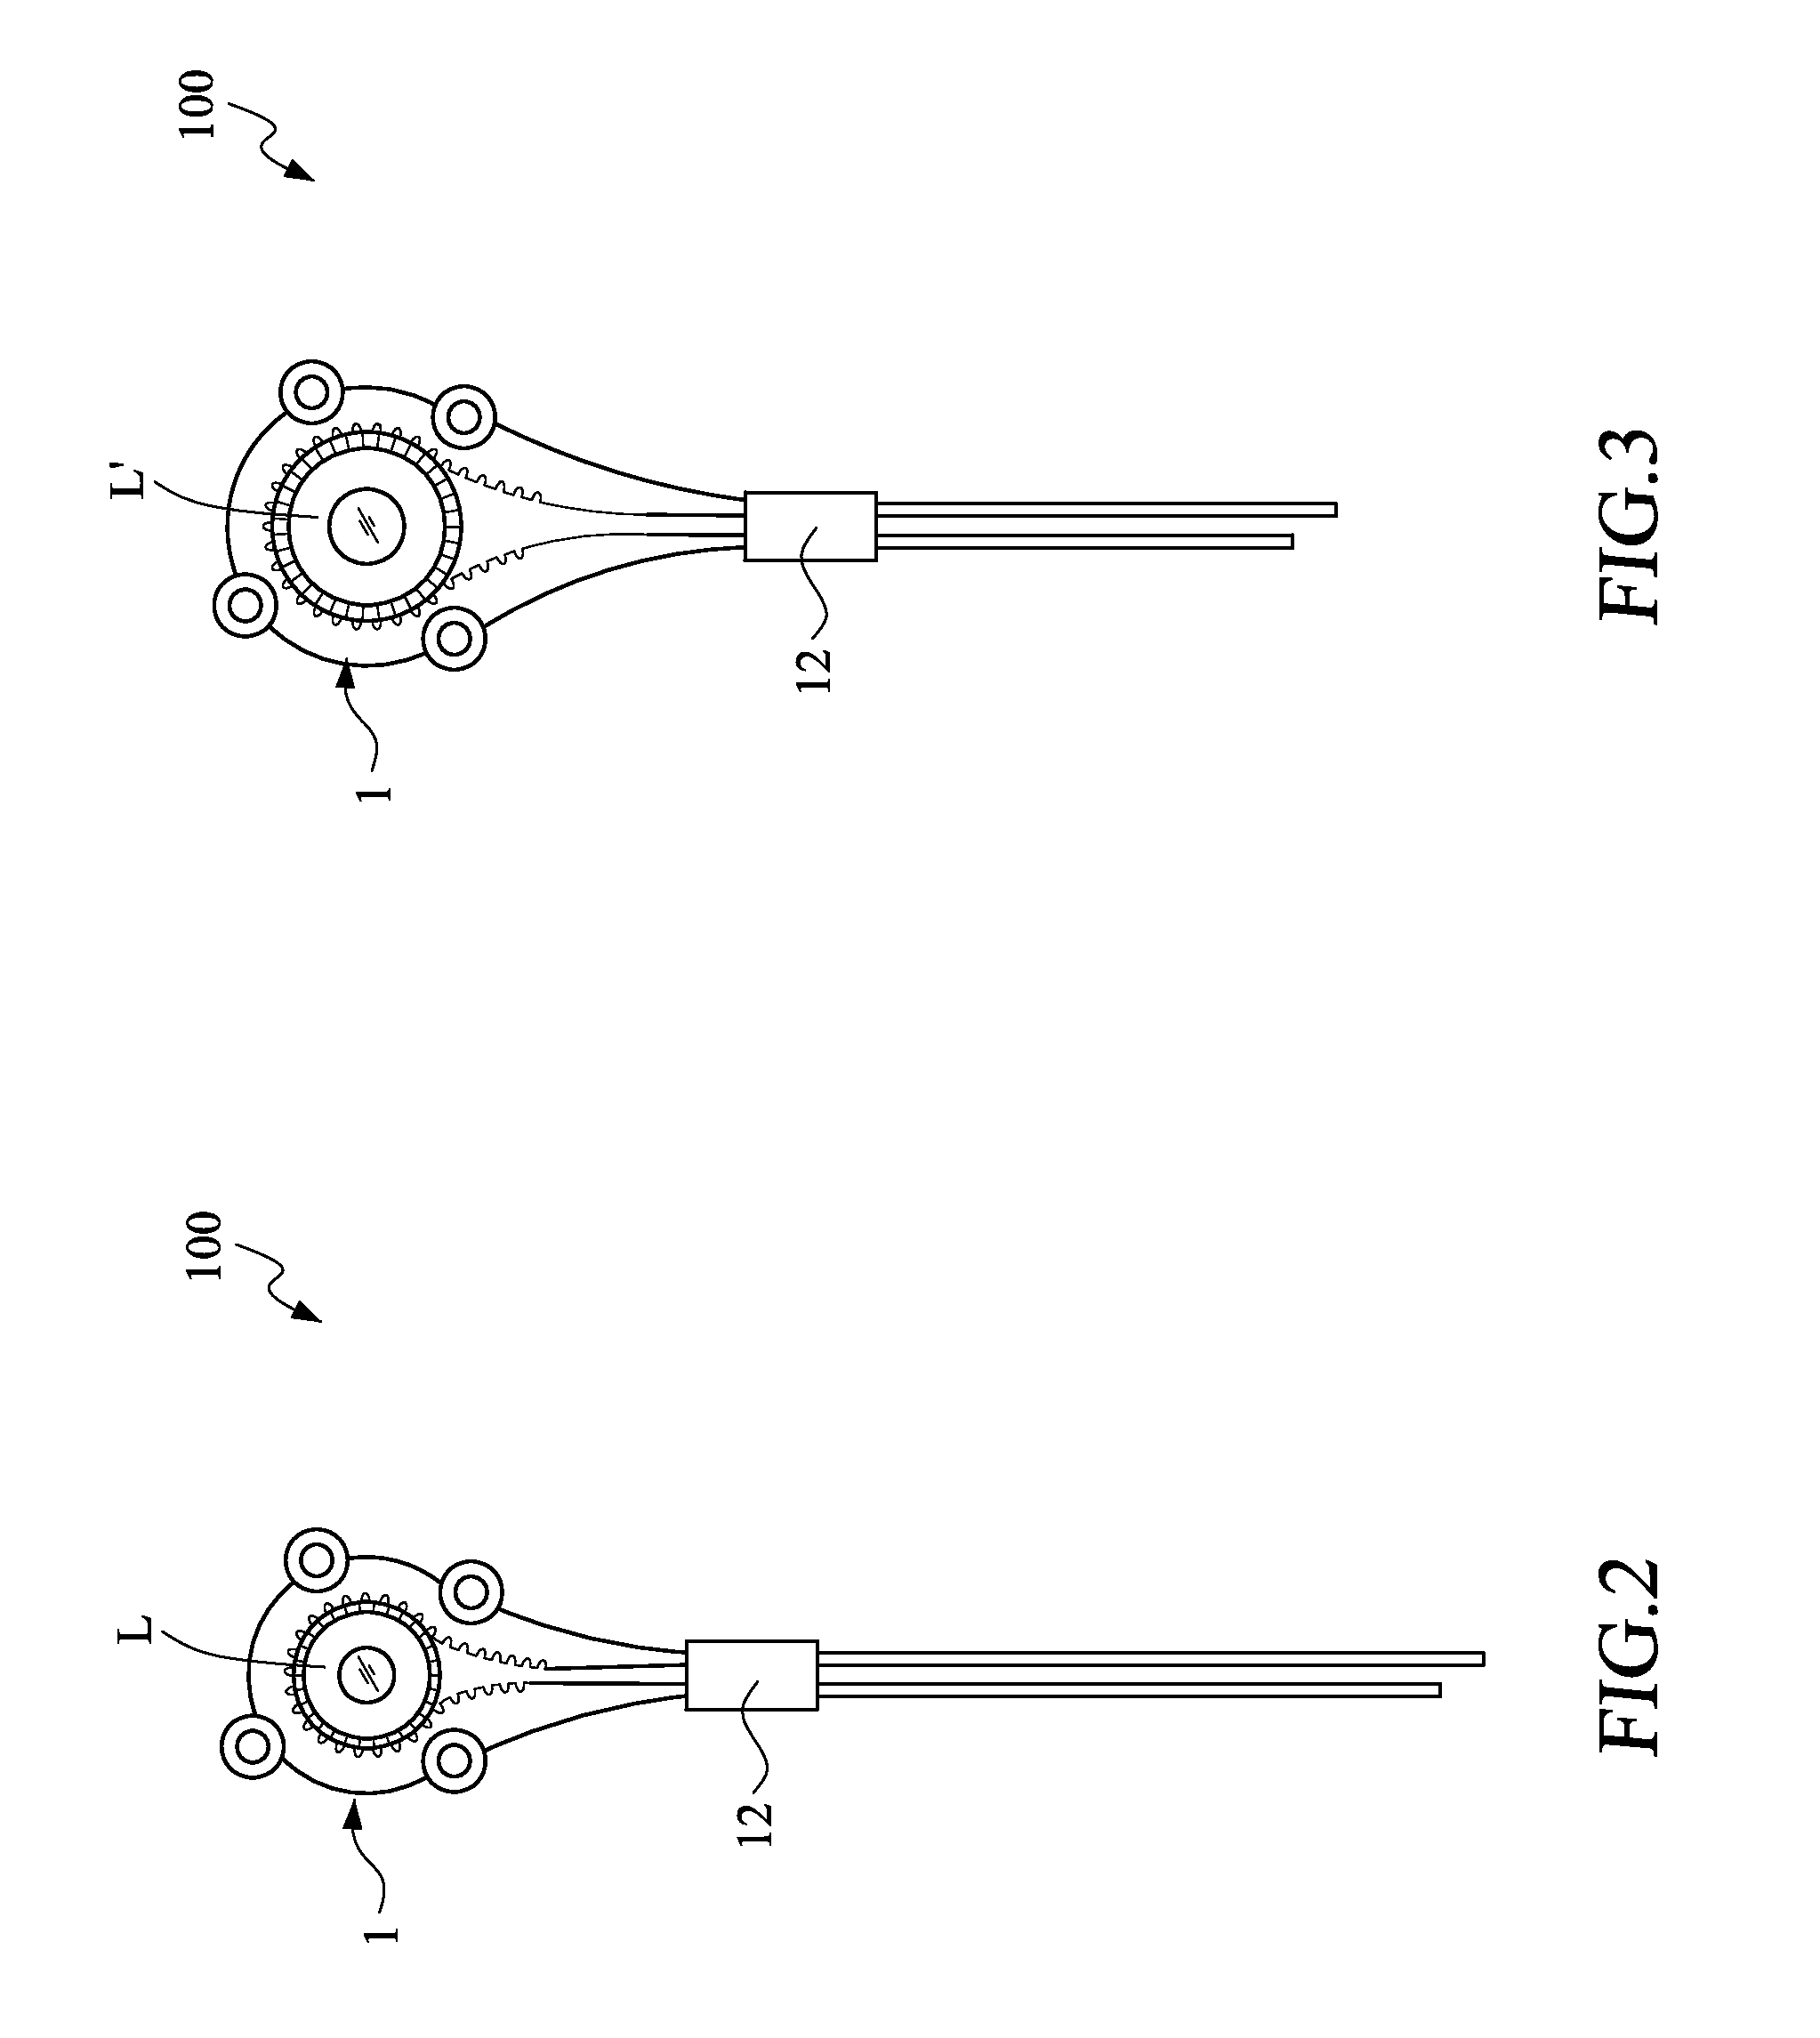 Adjustable attaching lens device